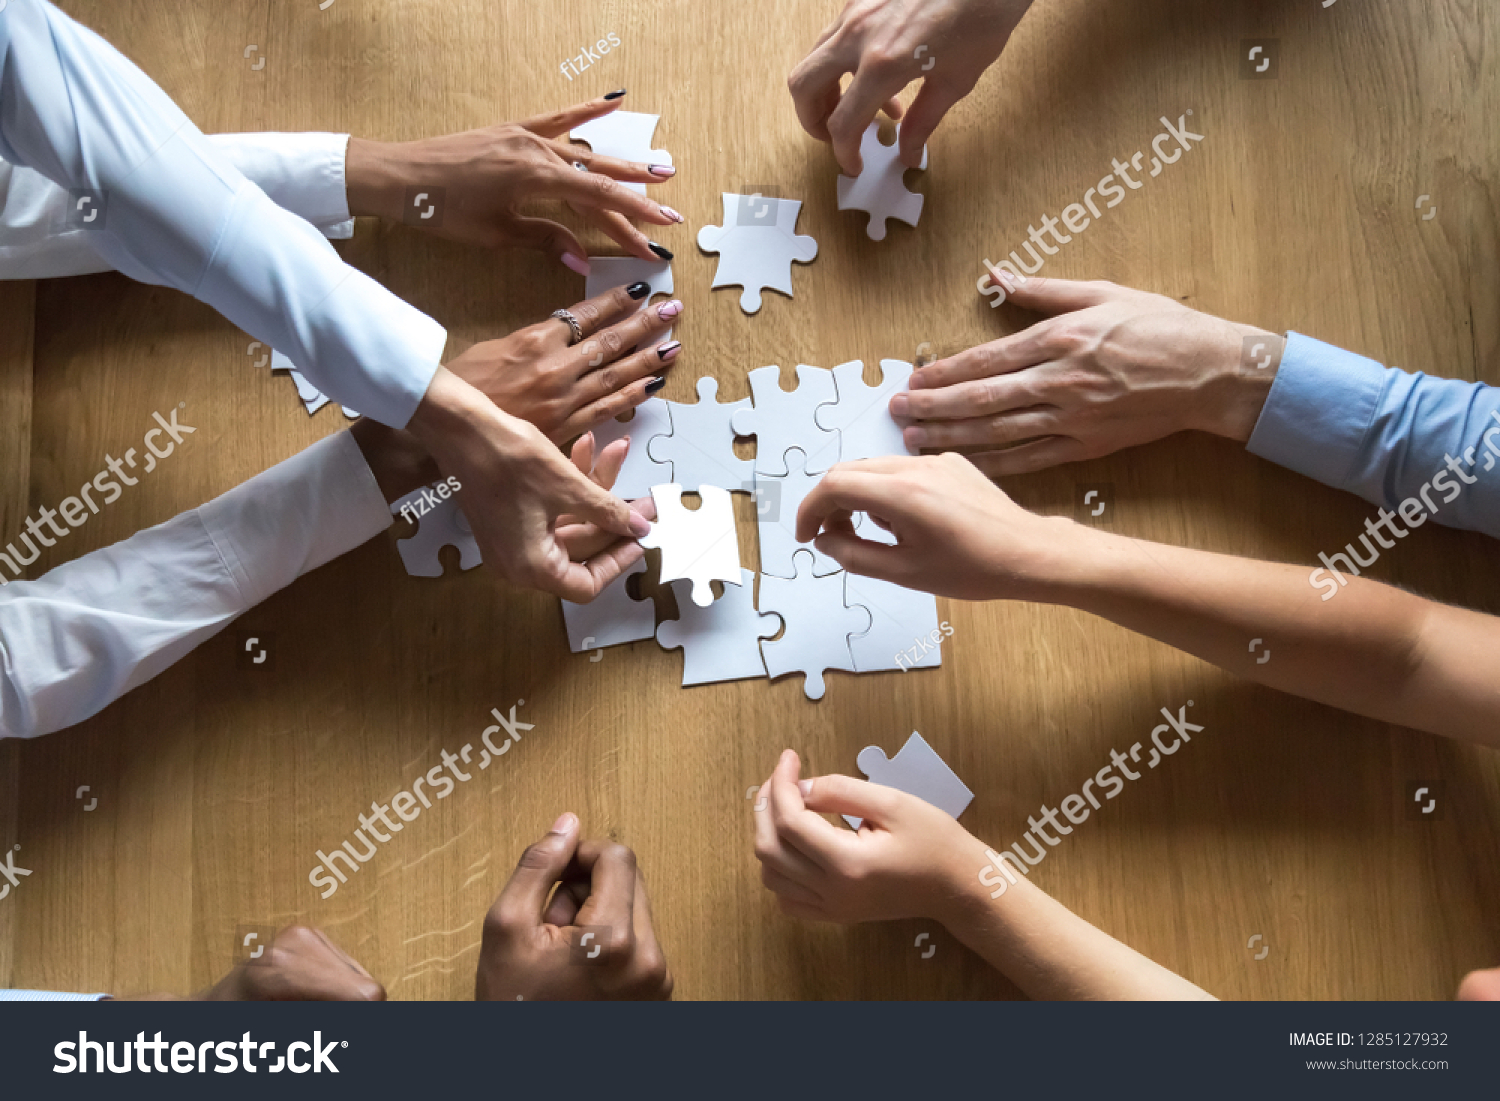 Above top view to the hands of diverse people assembling connecting jigsaw puzzle associates put pieces searching common solutions making right decisions together. Support and help in business concept #1285127932